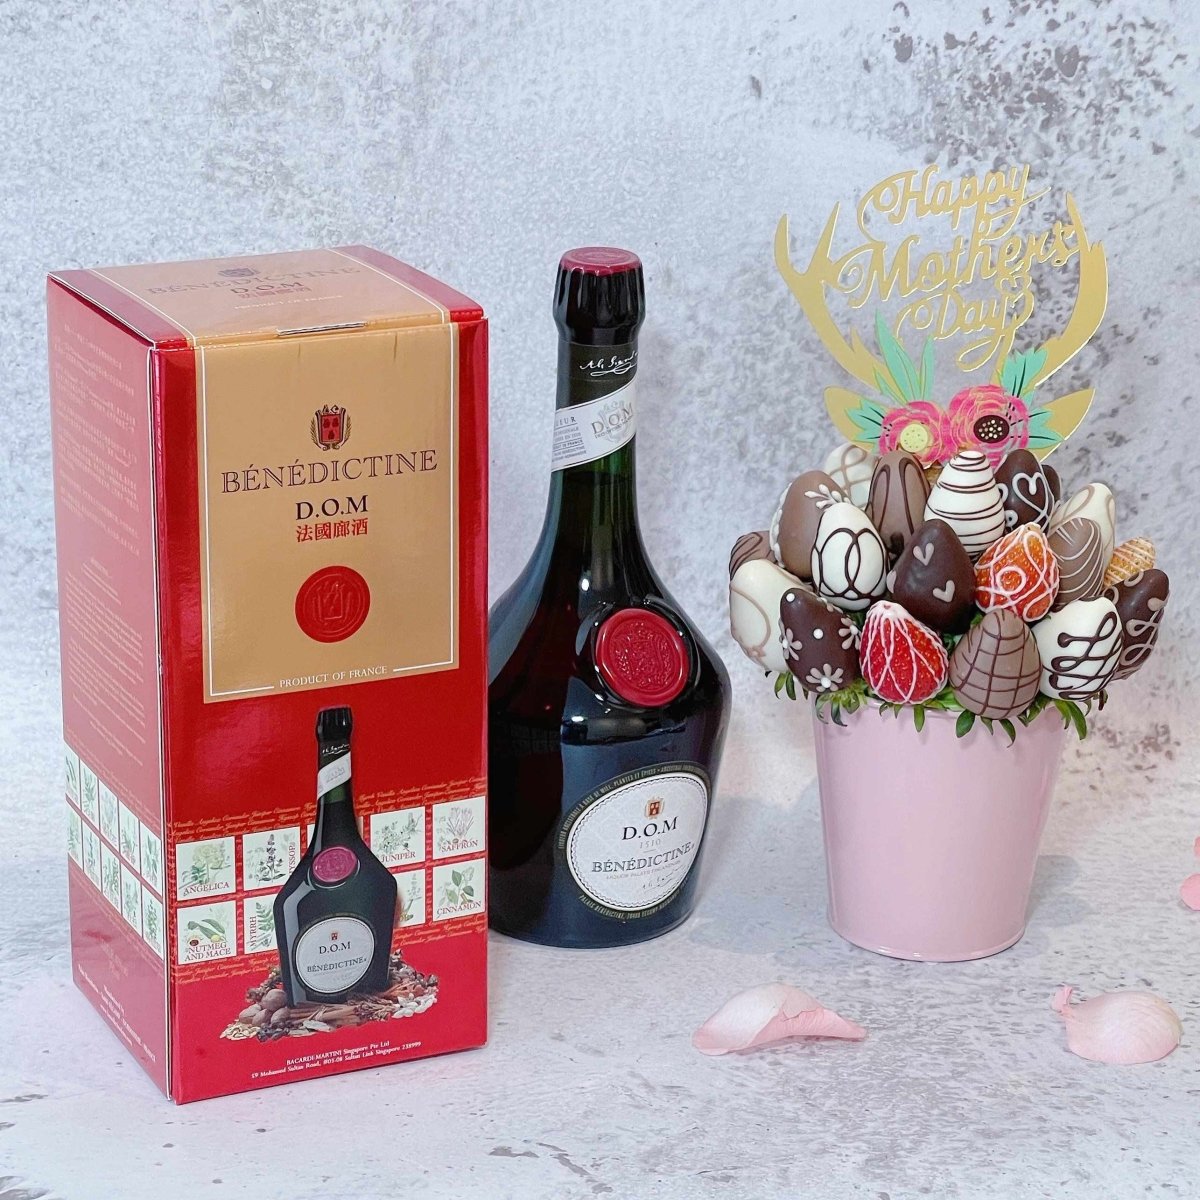 Mother's Day Bundle Deal - D.O.M & All About You - Fresh Chocolate Dipped Strawberry Fruit Bouquet Arrangement Pot - Rainbowly Fresh Fruit Gift and Flower Arrangments